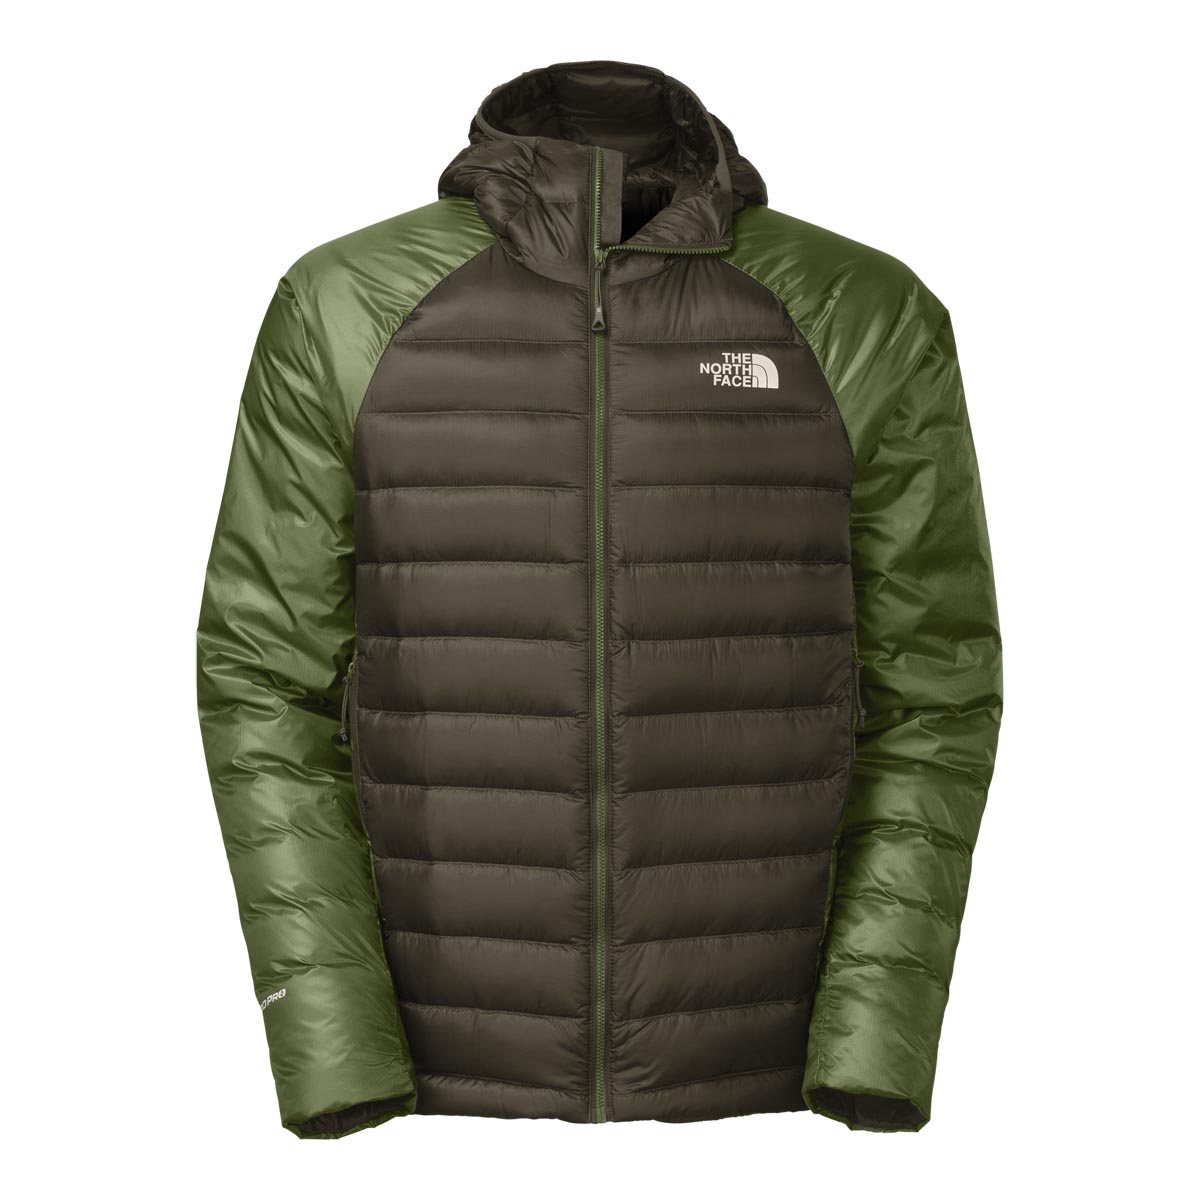 The North Face Men's Irondome Jacket